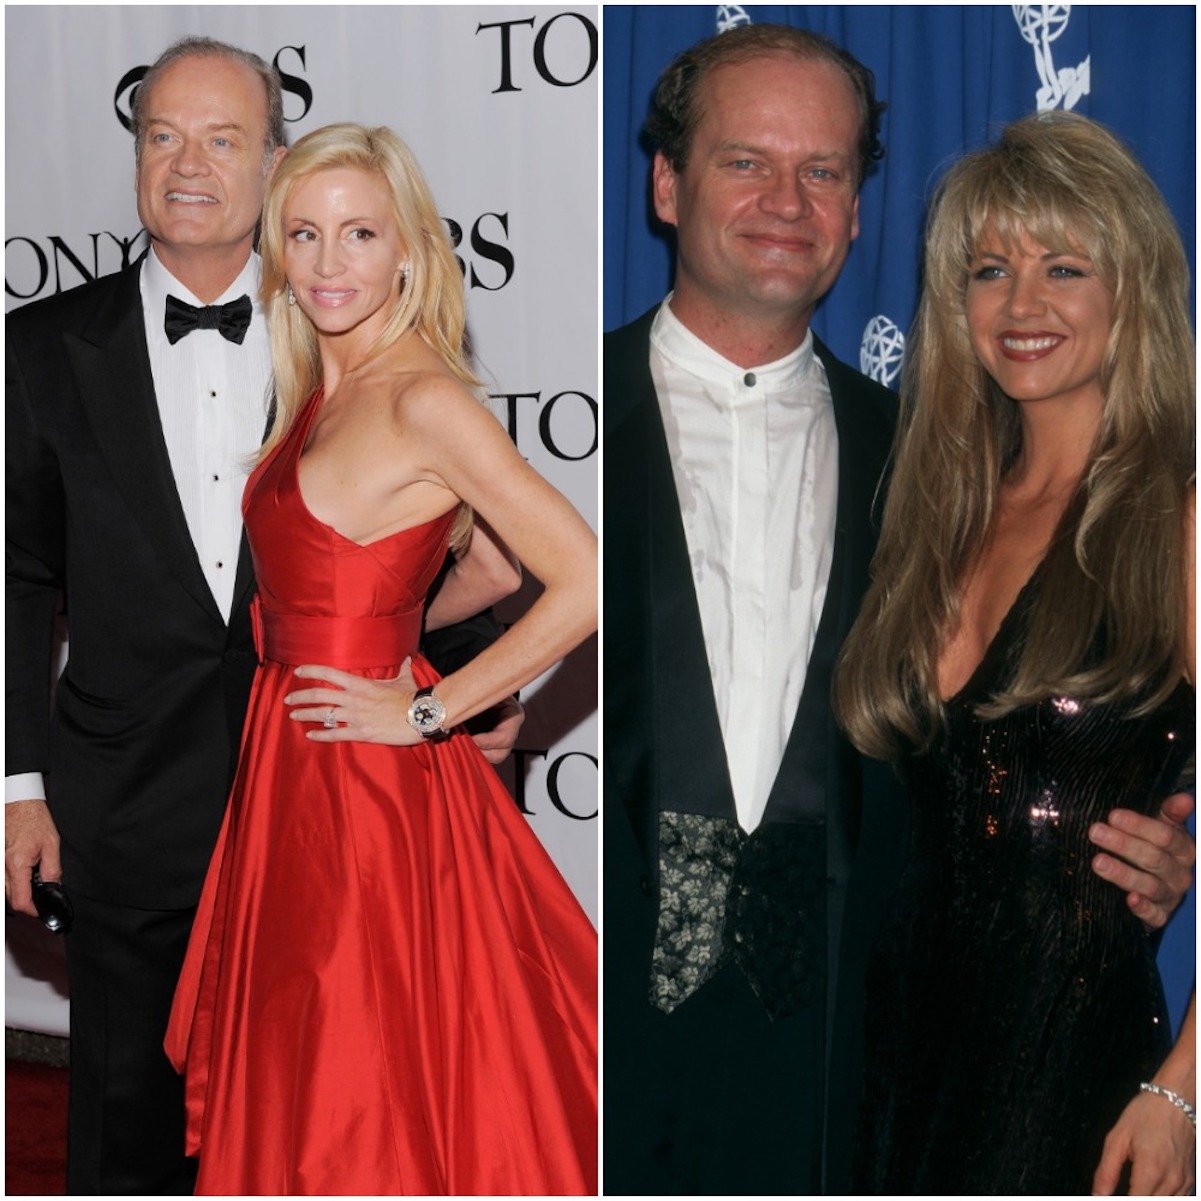 Kelsey Grammer and Camille Grammer; Kelsey Grammer and Tammi Baliszewski